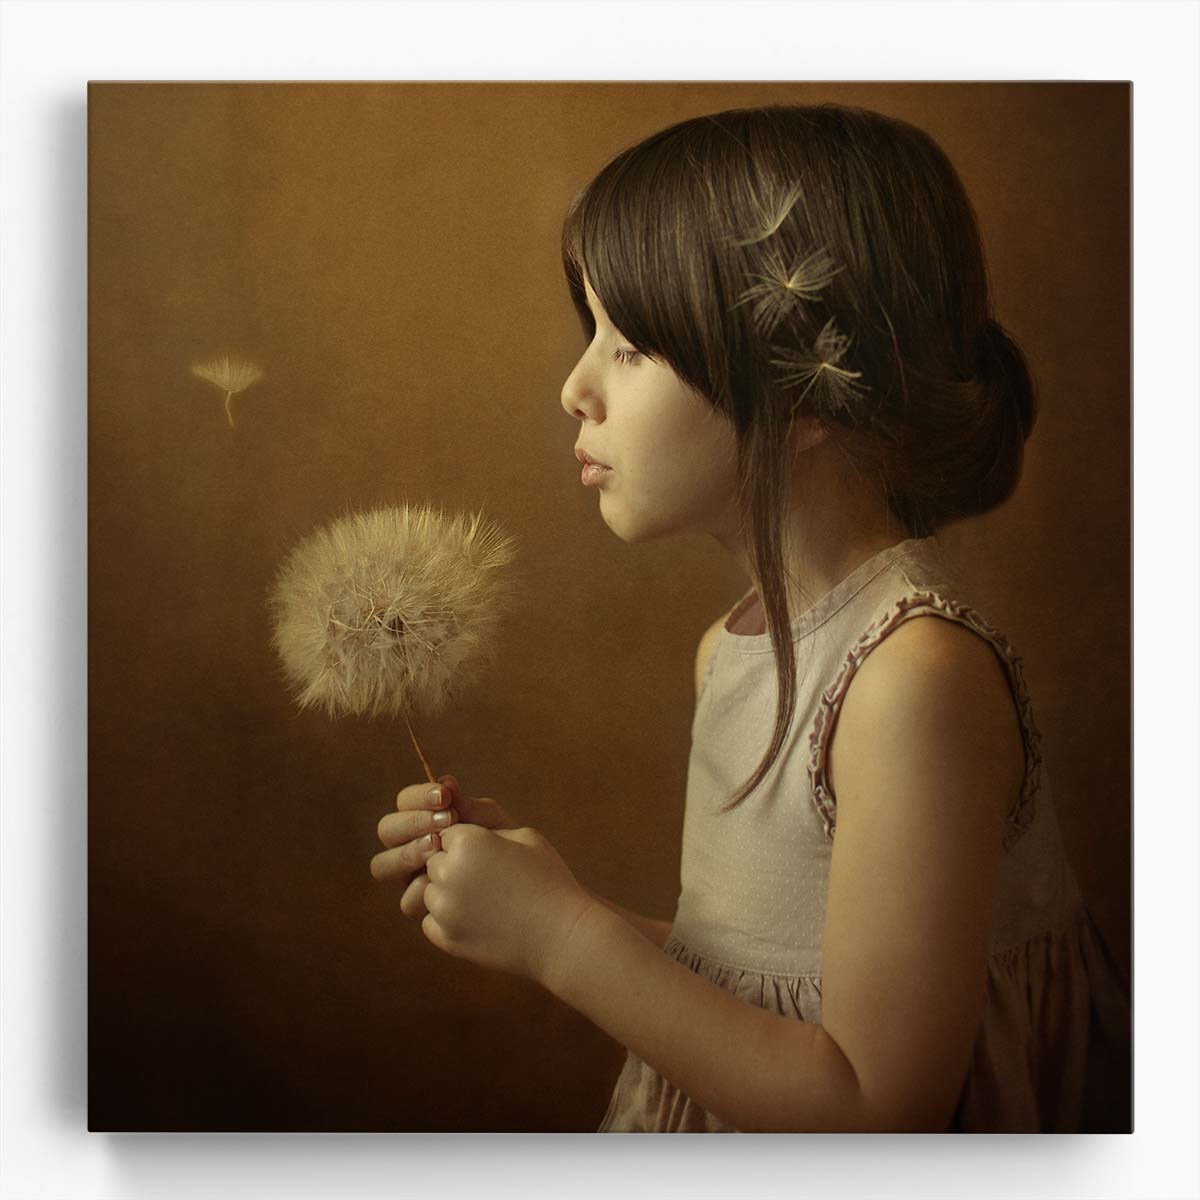 Autumn Serenity Girl Blowing Dandelion Sepia Portrait Wall Art by Luxuriance Designs. Made in USA.